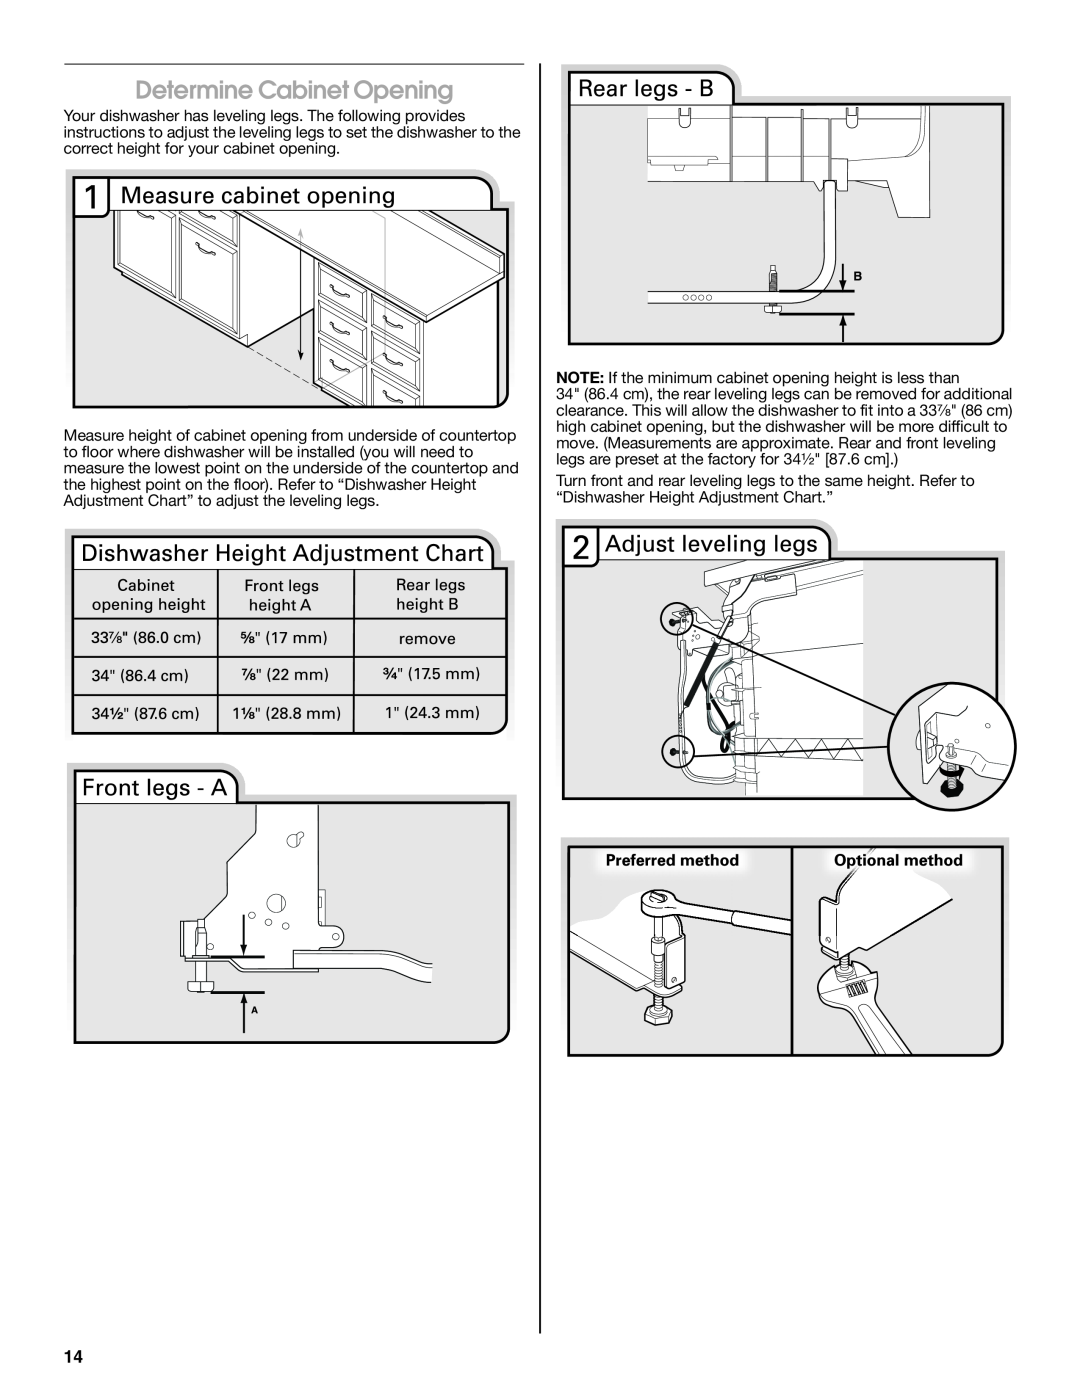 Whirlpool W10435039A installation instructions Determine Cabinet Opening 